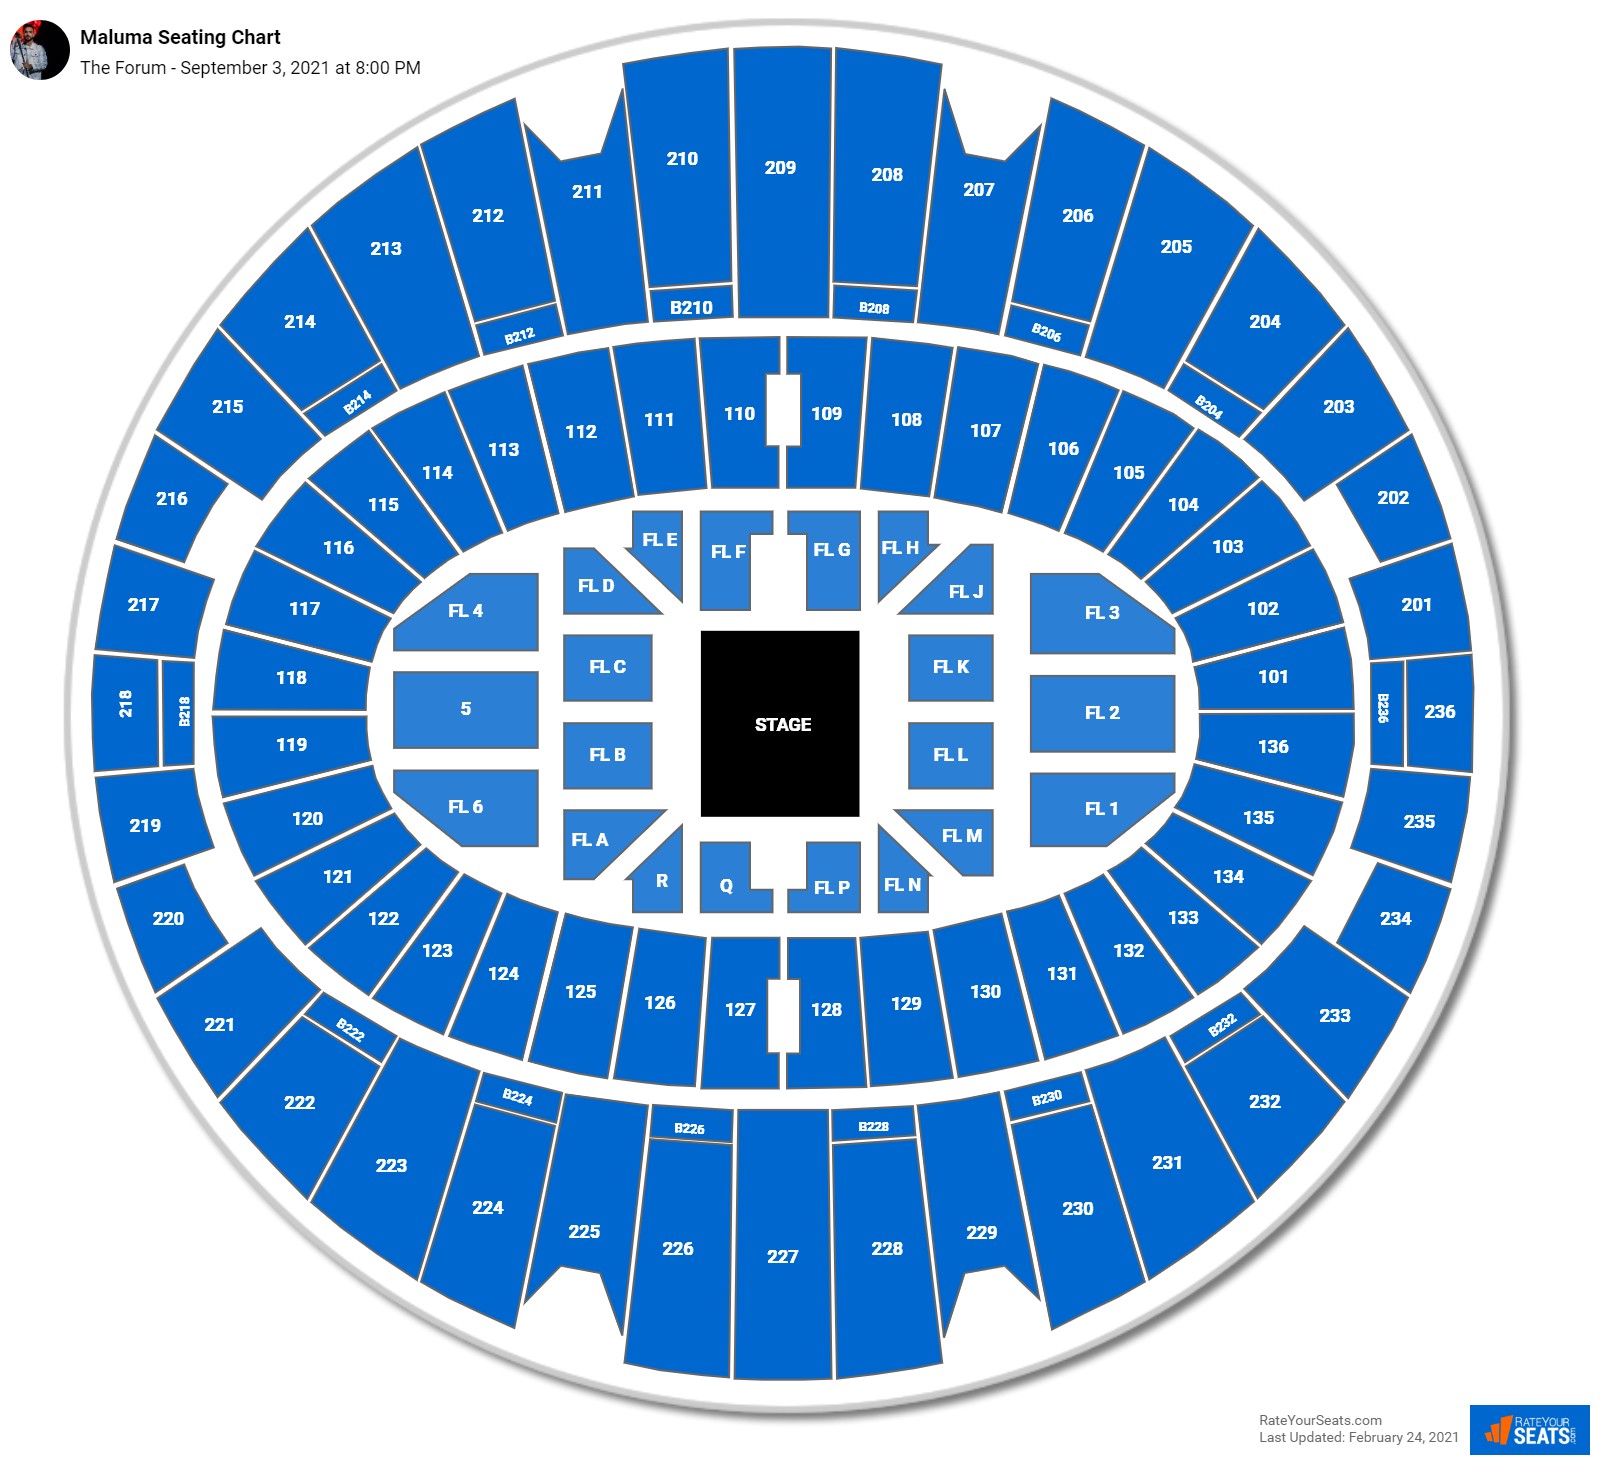 The Forum Seating Chart - RateYourSeats.com